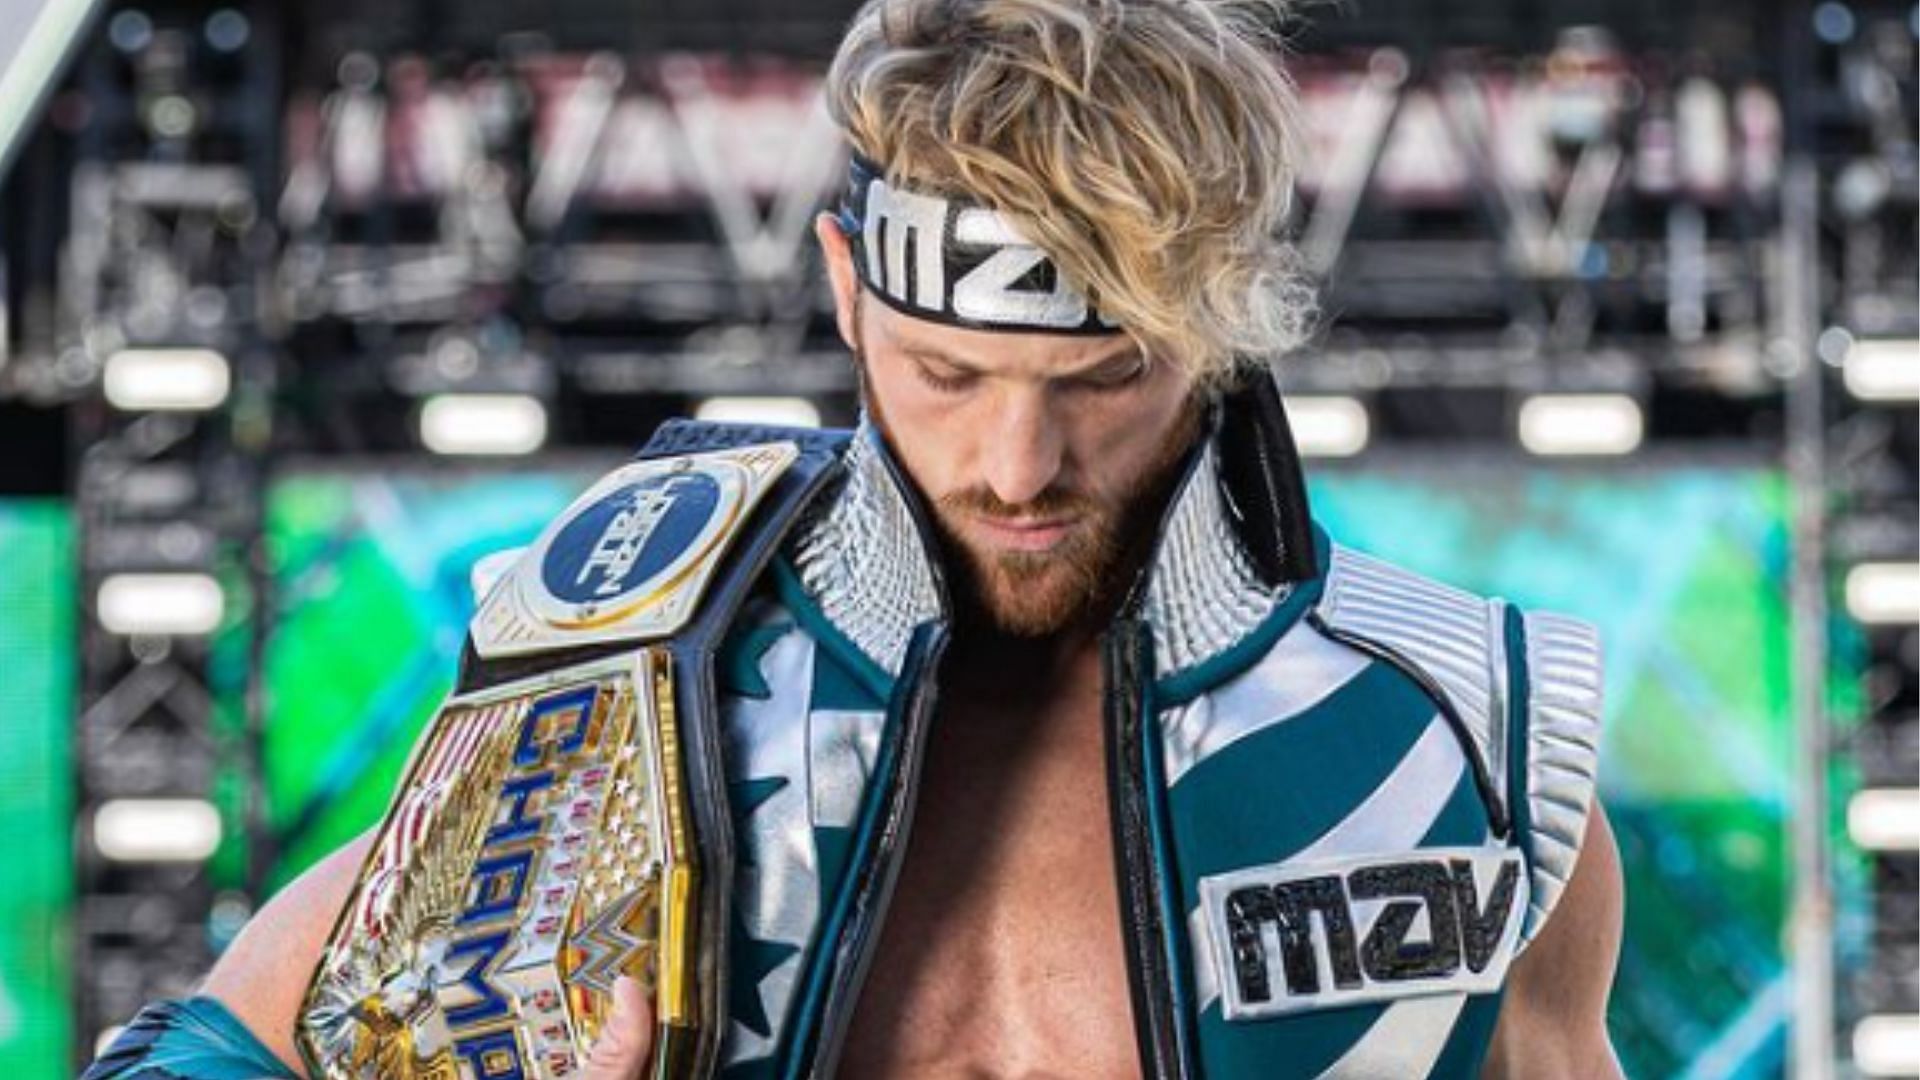 Logan Paul is the current US Champion in WWE [Image Credits: Paul